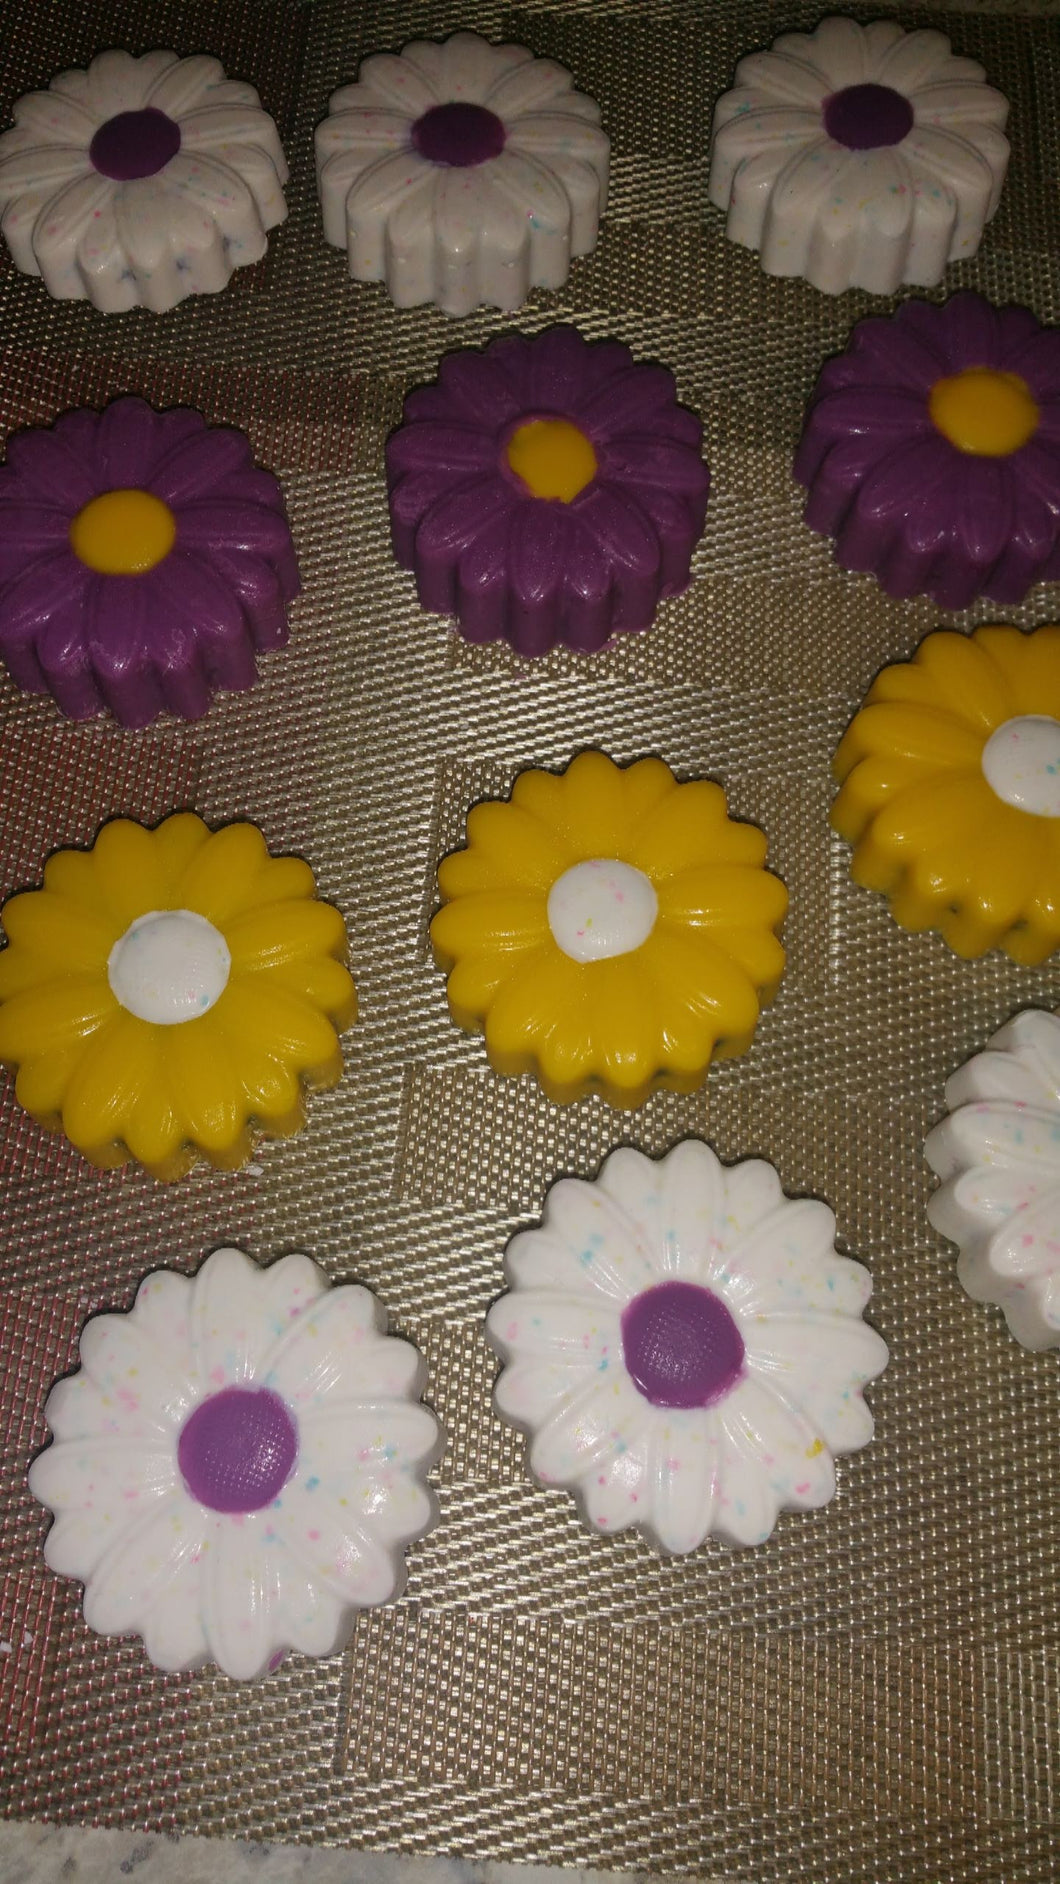 Oreo Cookies - Chocolate Covered/Dipped (Daisy Sunflower)